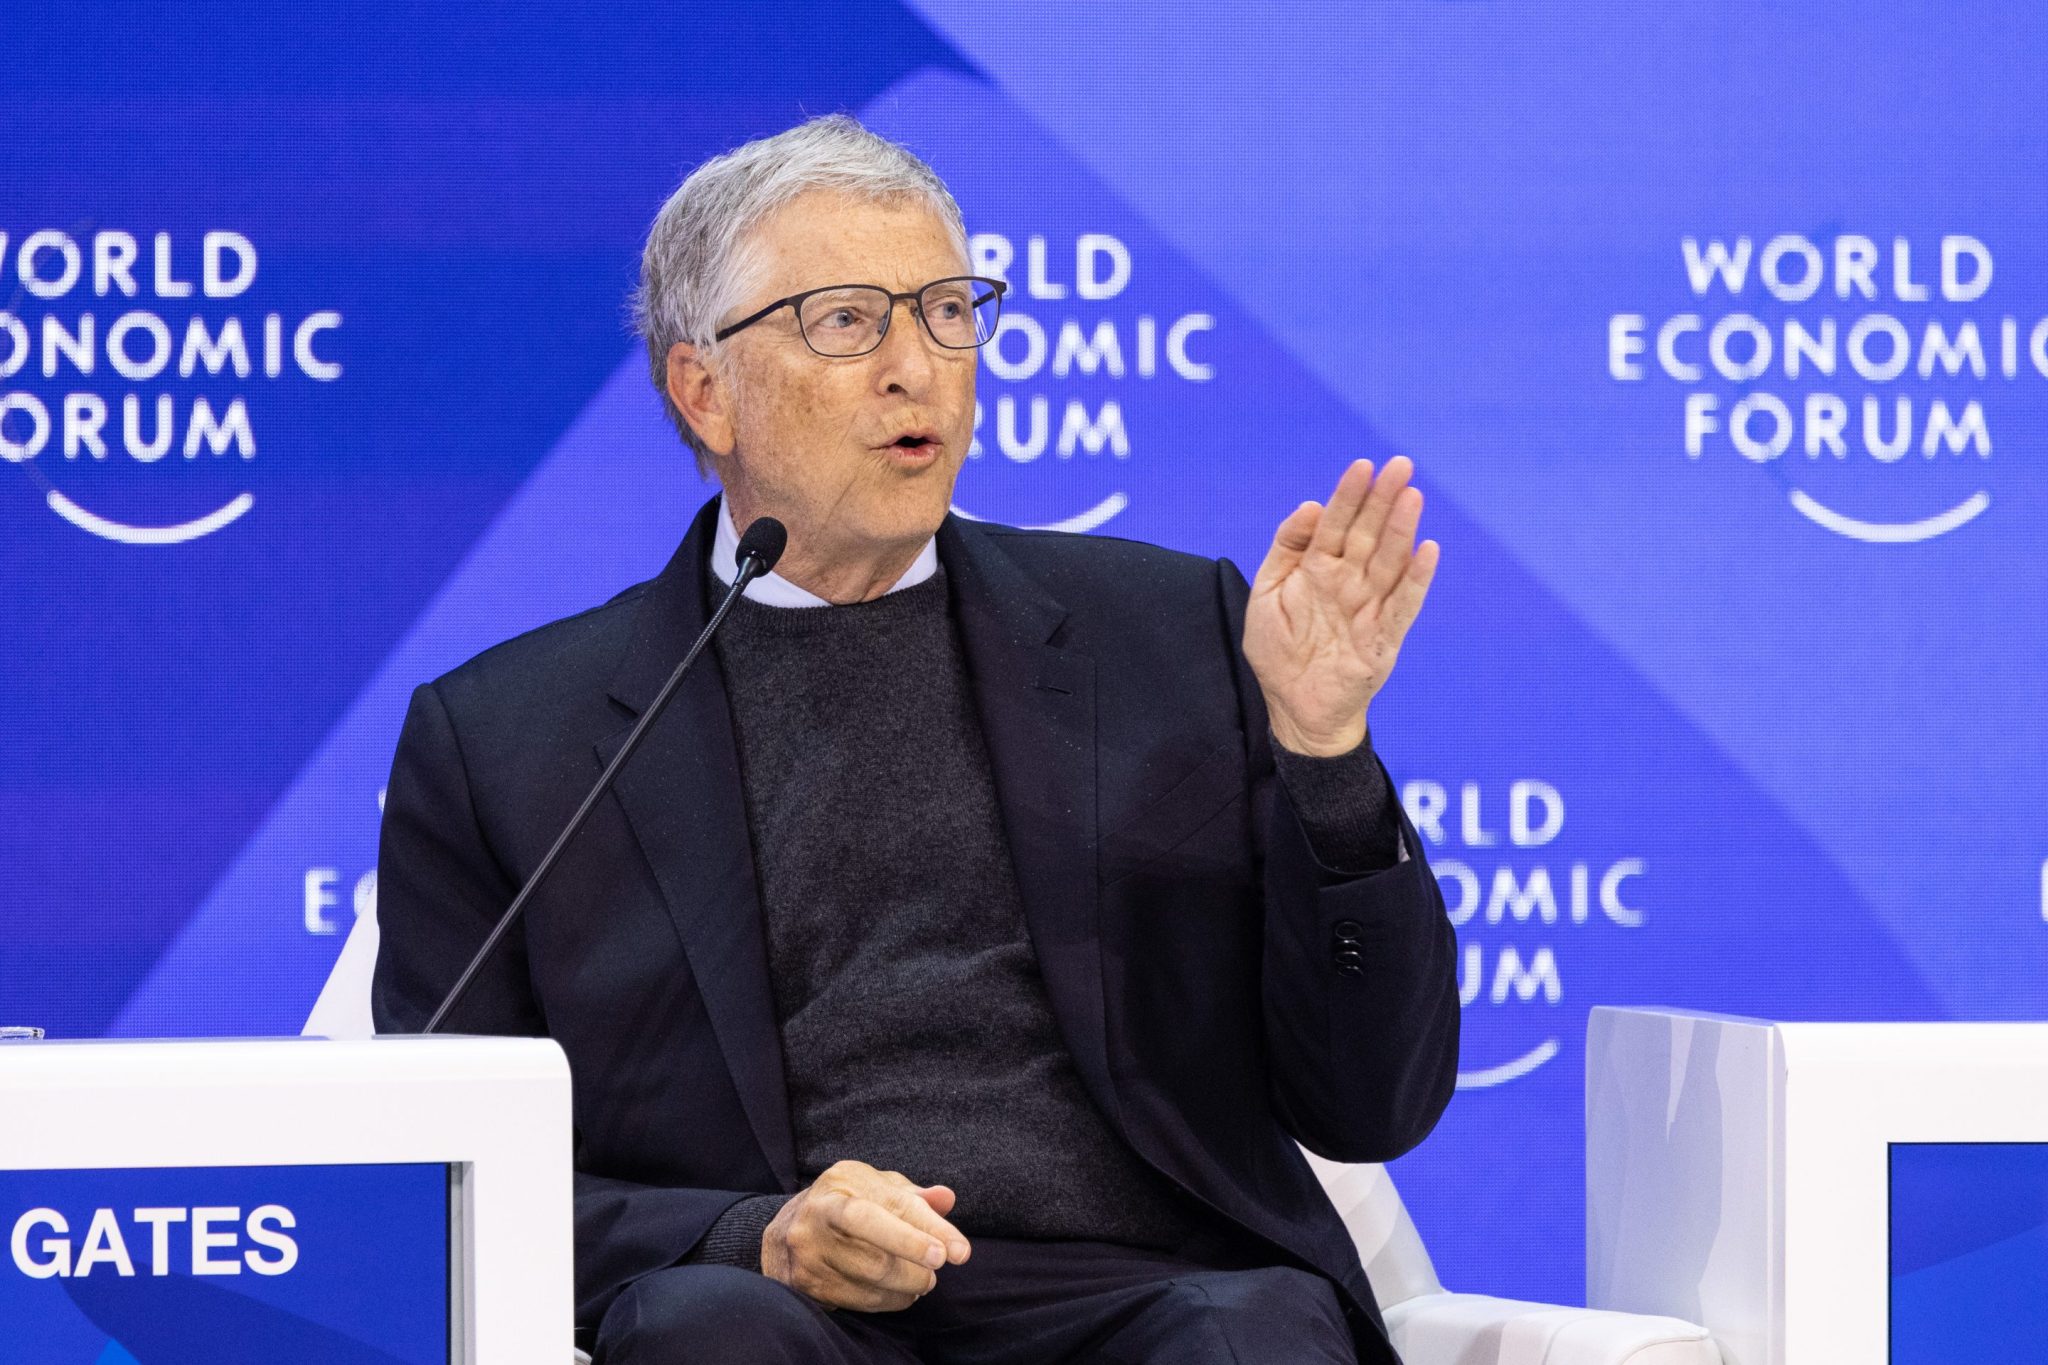 microsoft, bill gates foundation chief takes a shot at donors who give only to elite universities, urging them to follow chuck feeney’s example